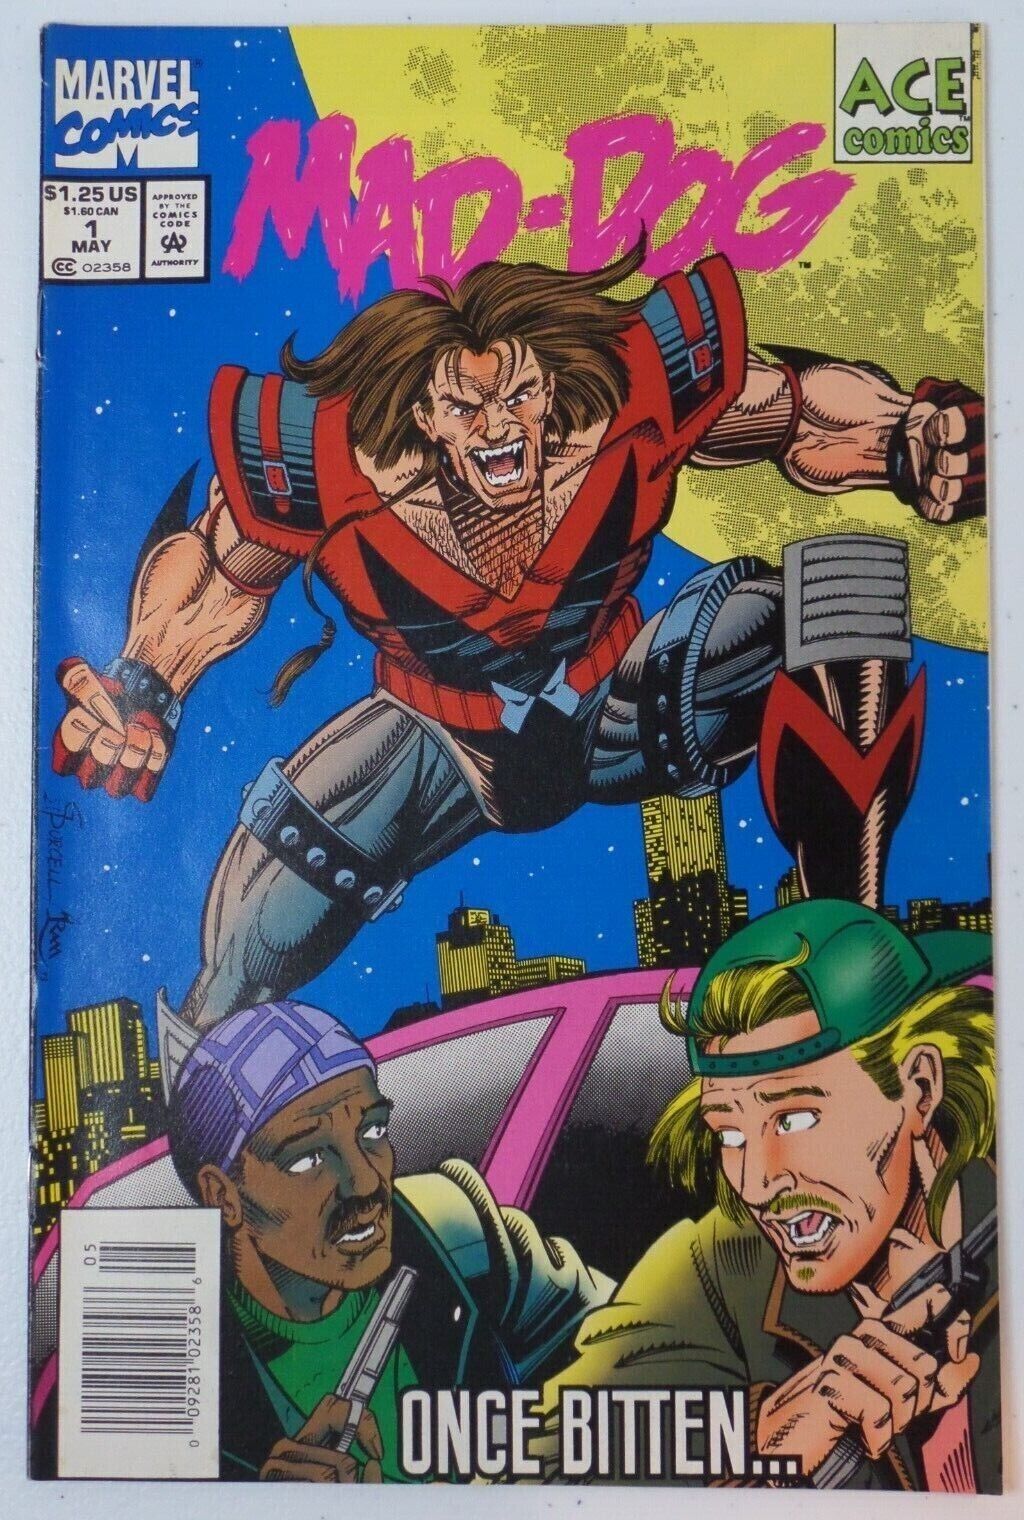 MAD-DOG Once Bitten #1 1993 Double Cover Marvel Comic Book A611